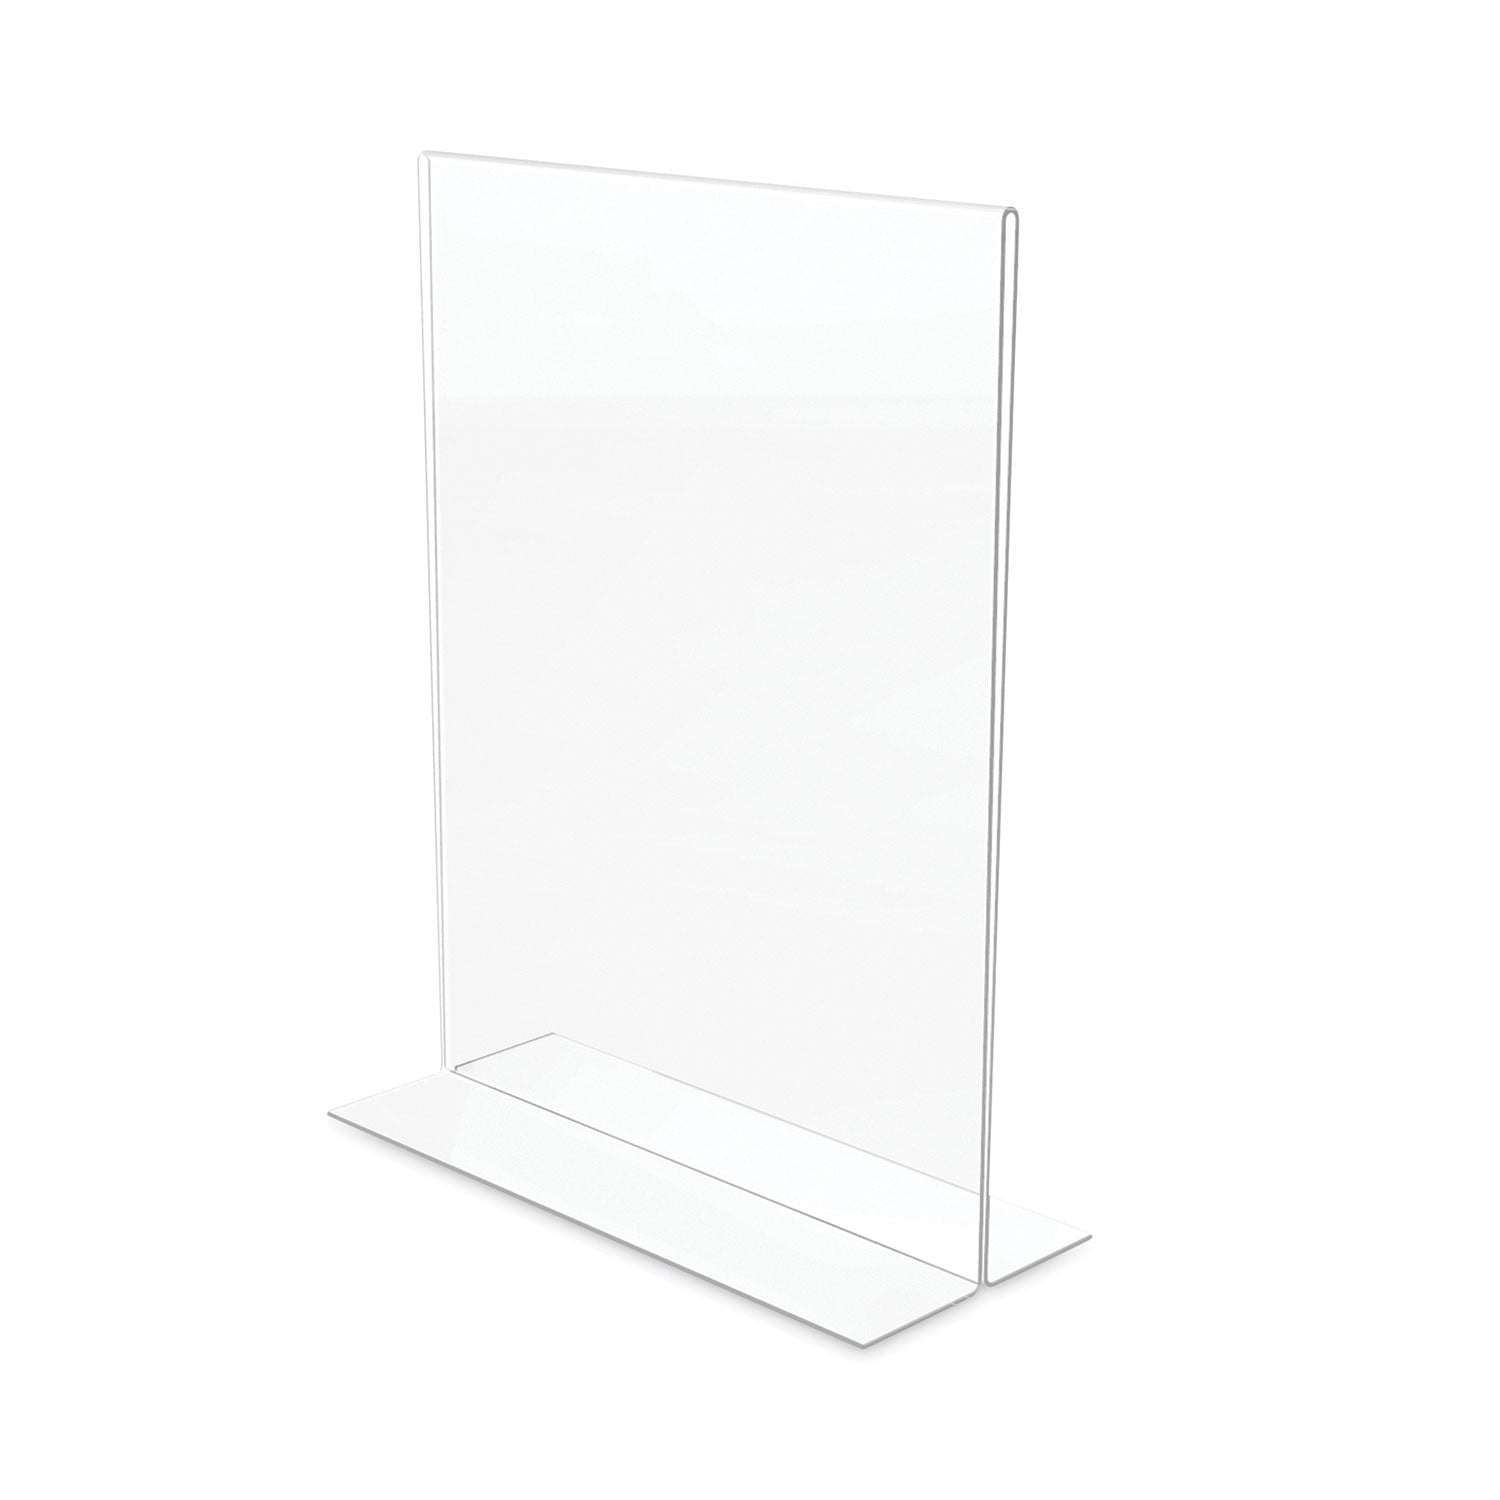 Classic Image Double-Sided Sign Holder, 8.5 x 11 Insert, Clear - 